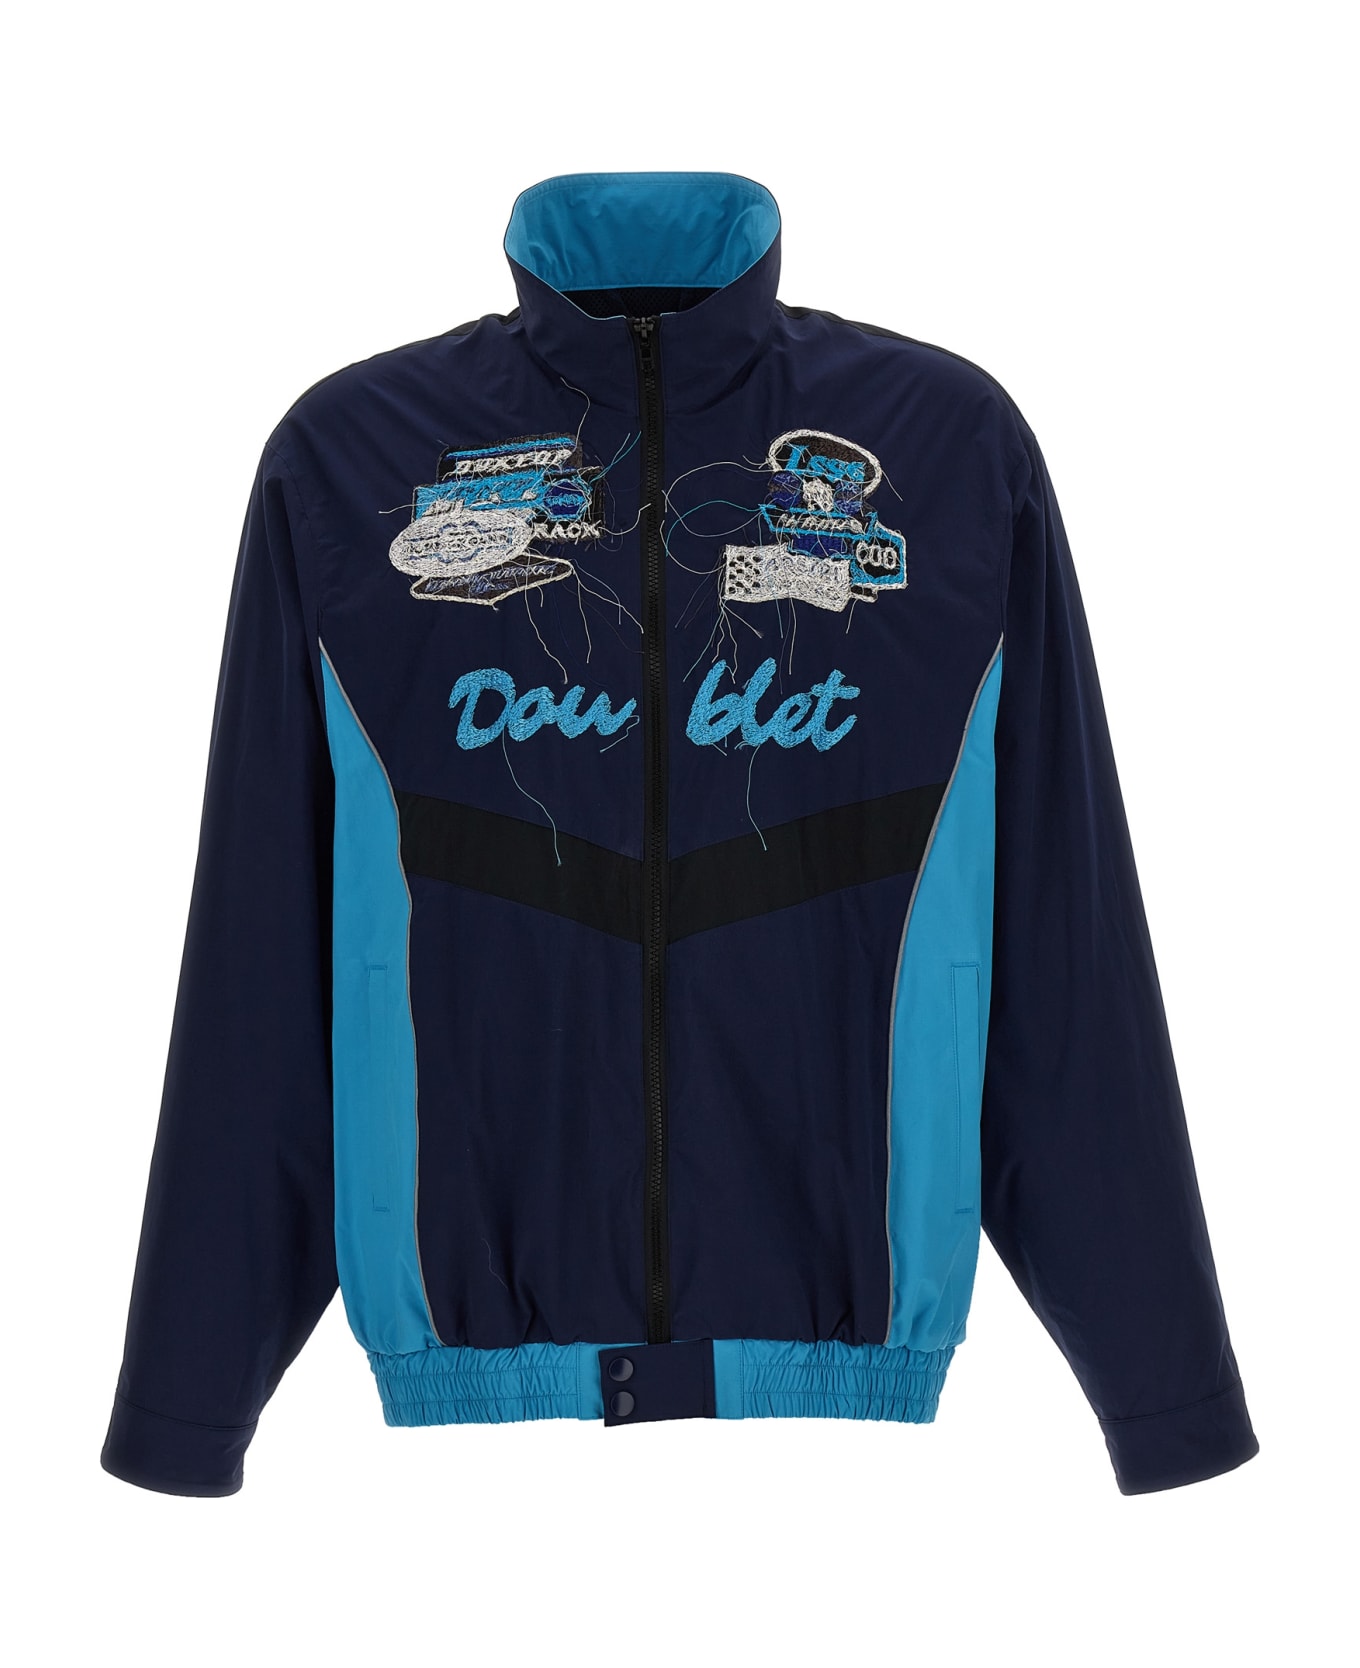 doublet 'a.i. Patches Embroidery' Jacket - Blue